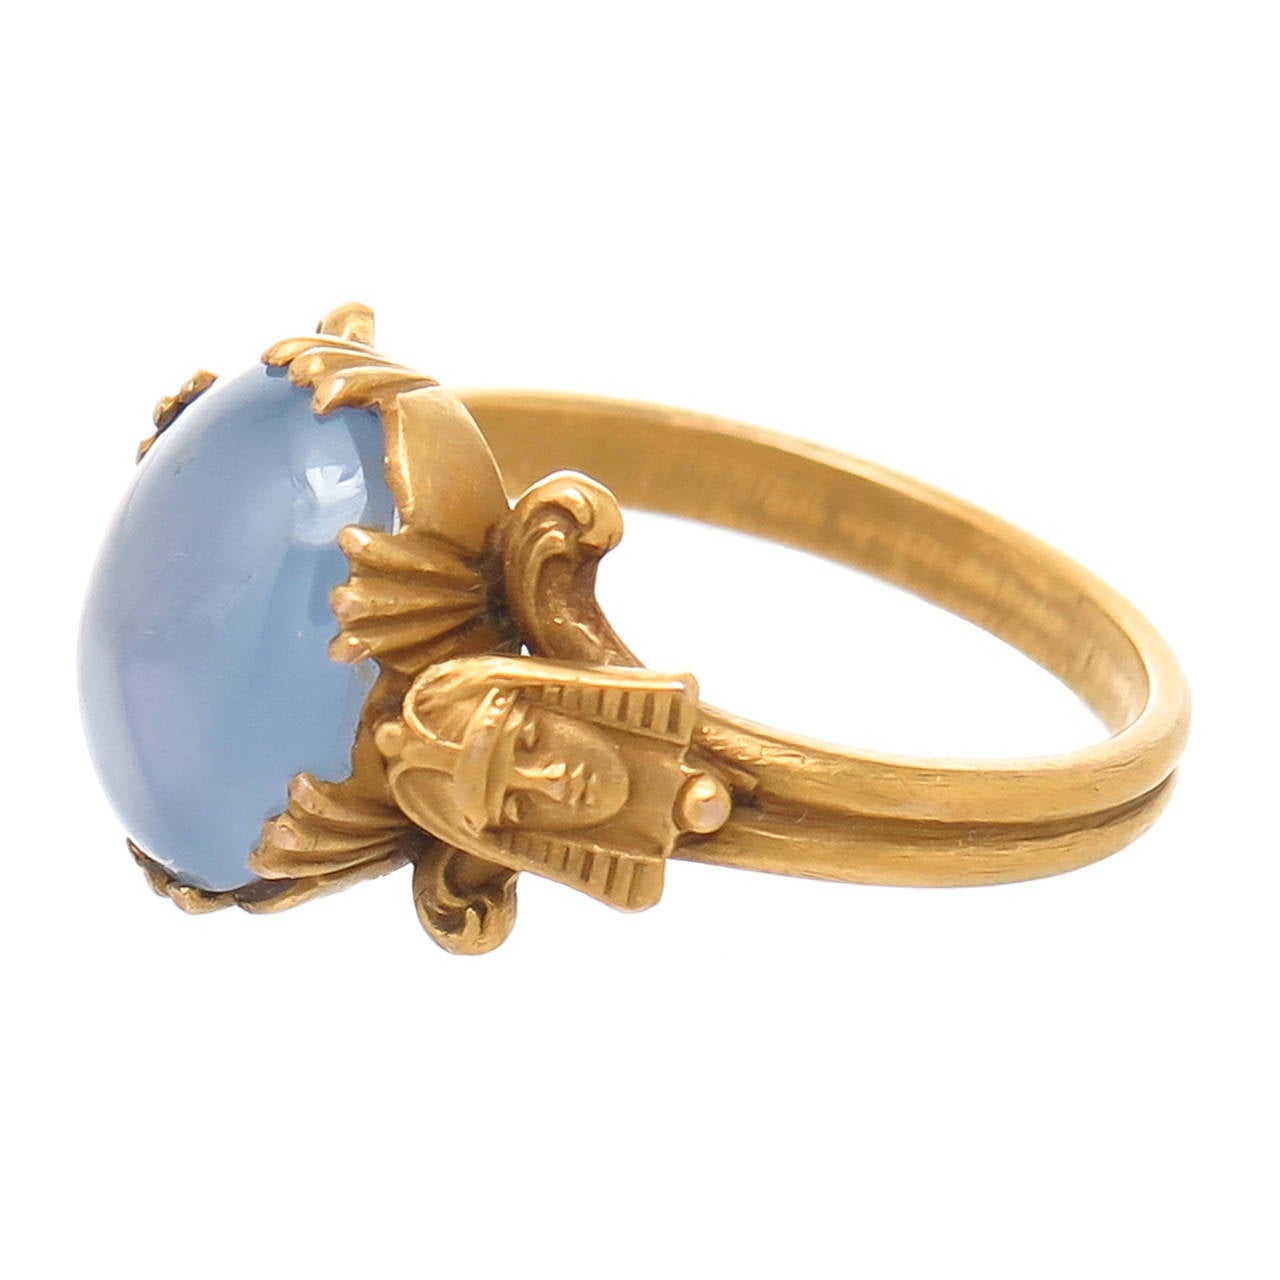 Circa 1910 14K Yellow Gold Egyptian Revival Ring, set with a Light Blue Star Sapphire measuring 9.5 X 7  approximately 2.5 Carats. Signed 